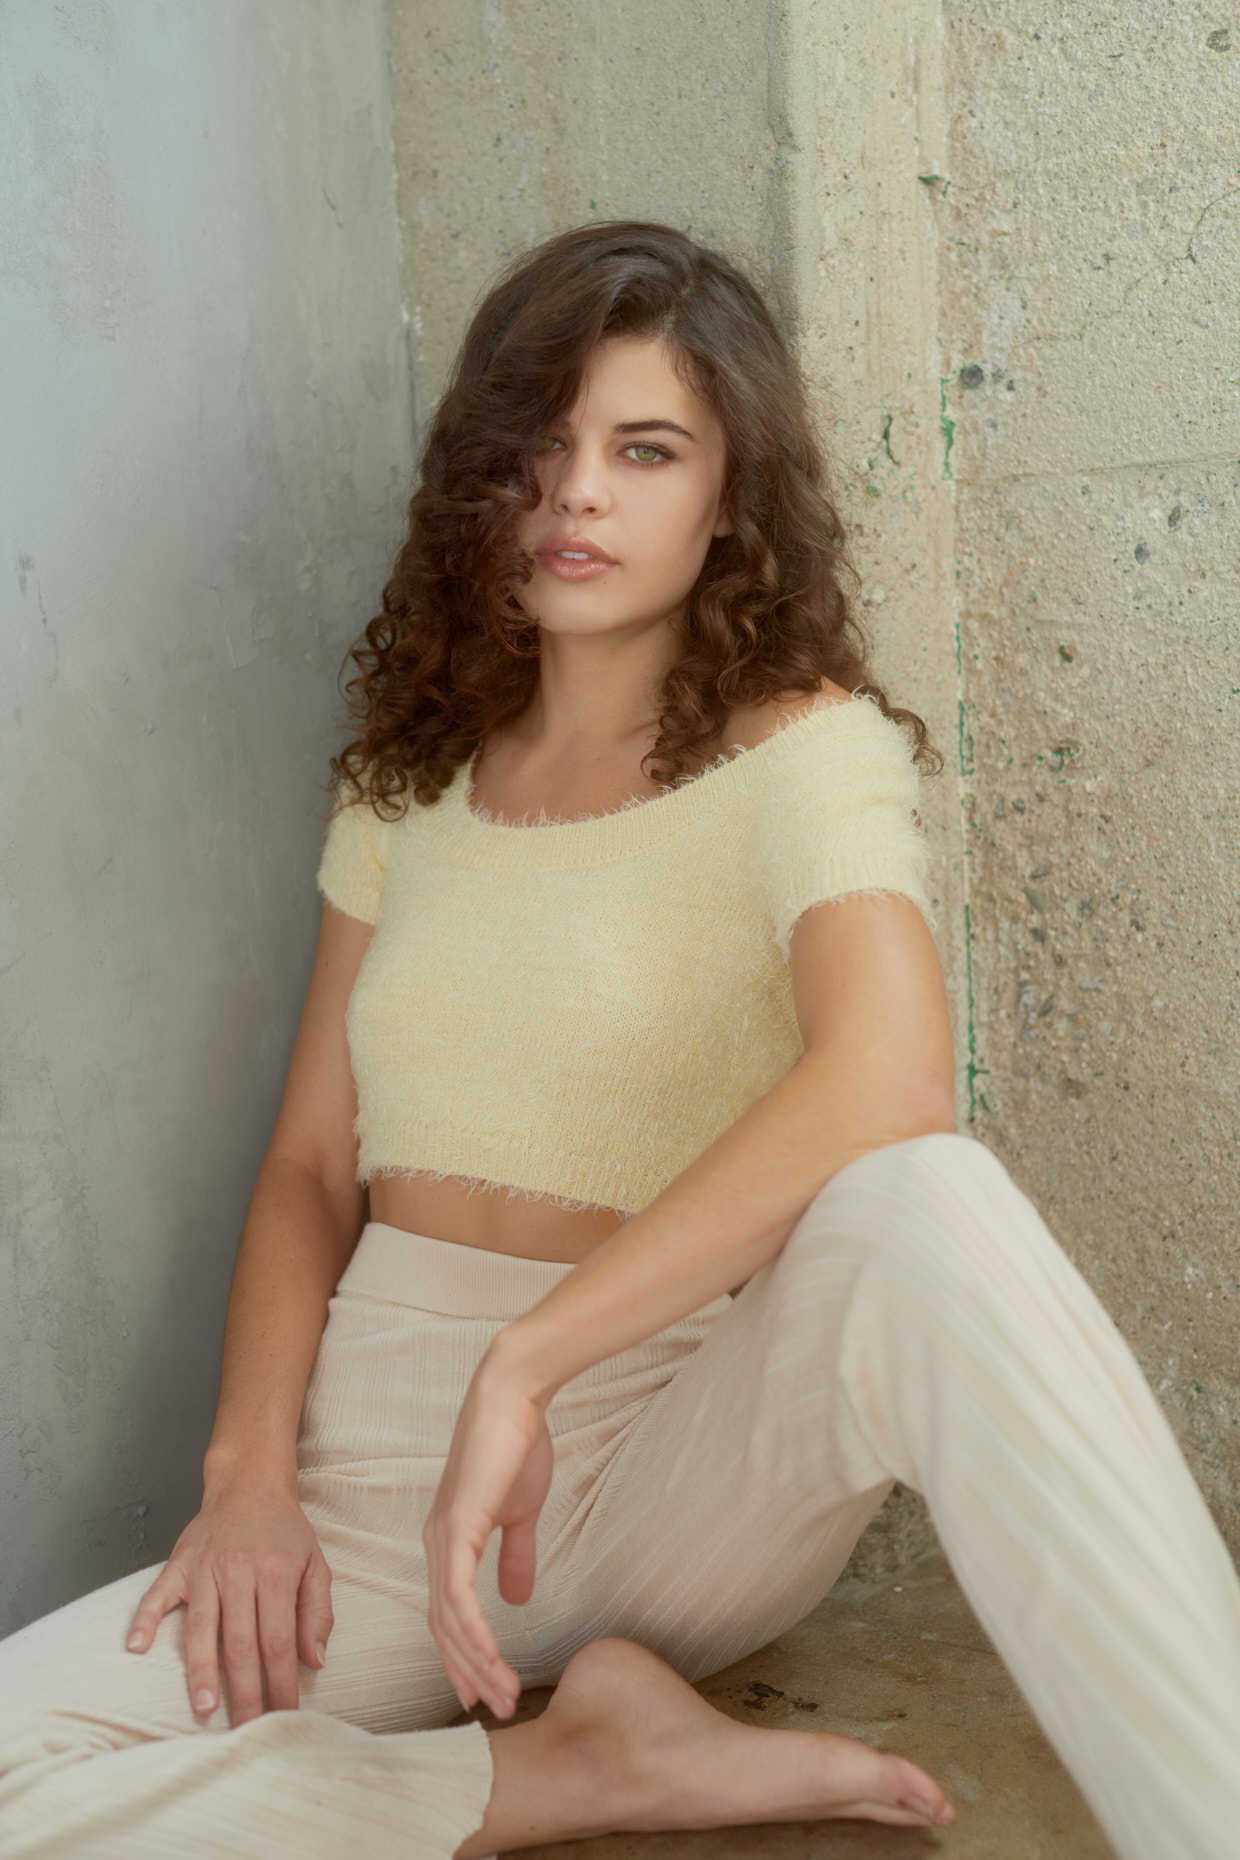 Model Kalena Audrey sits in the corner of the room with shite cropped top sweater